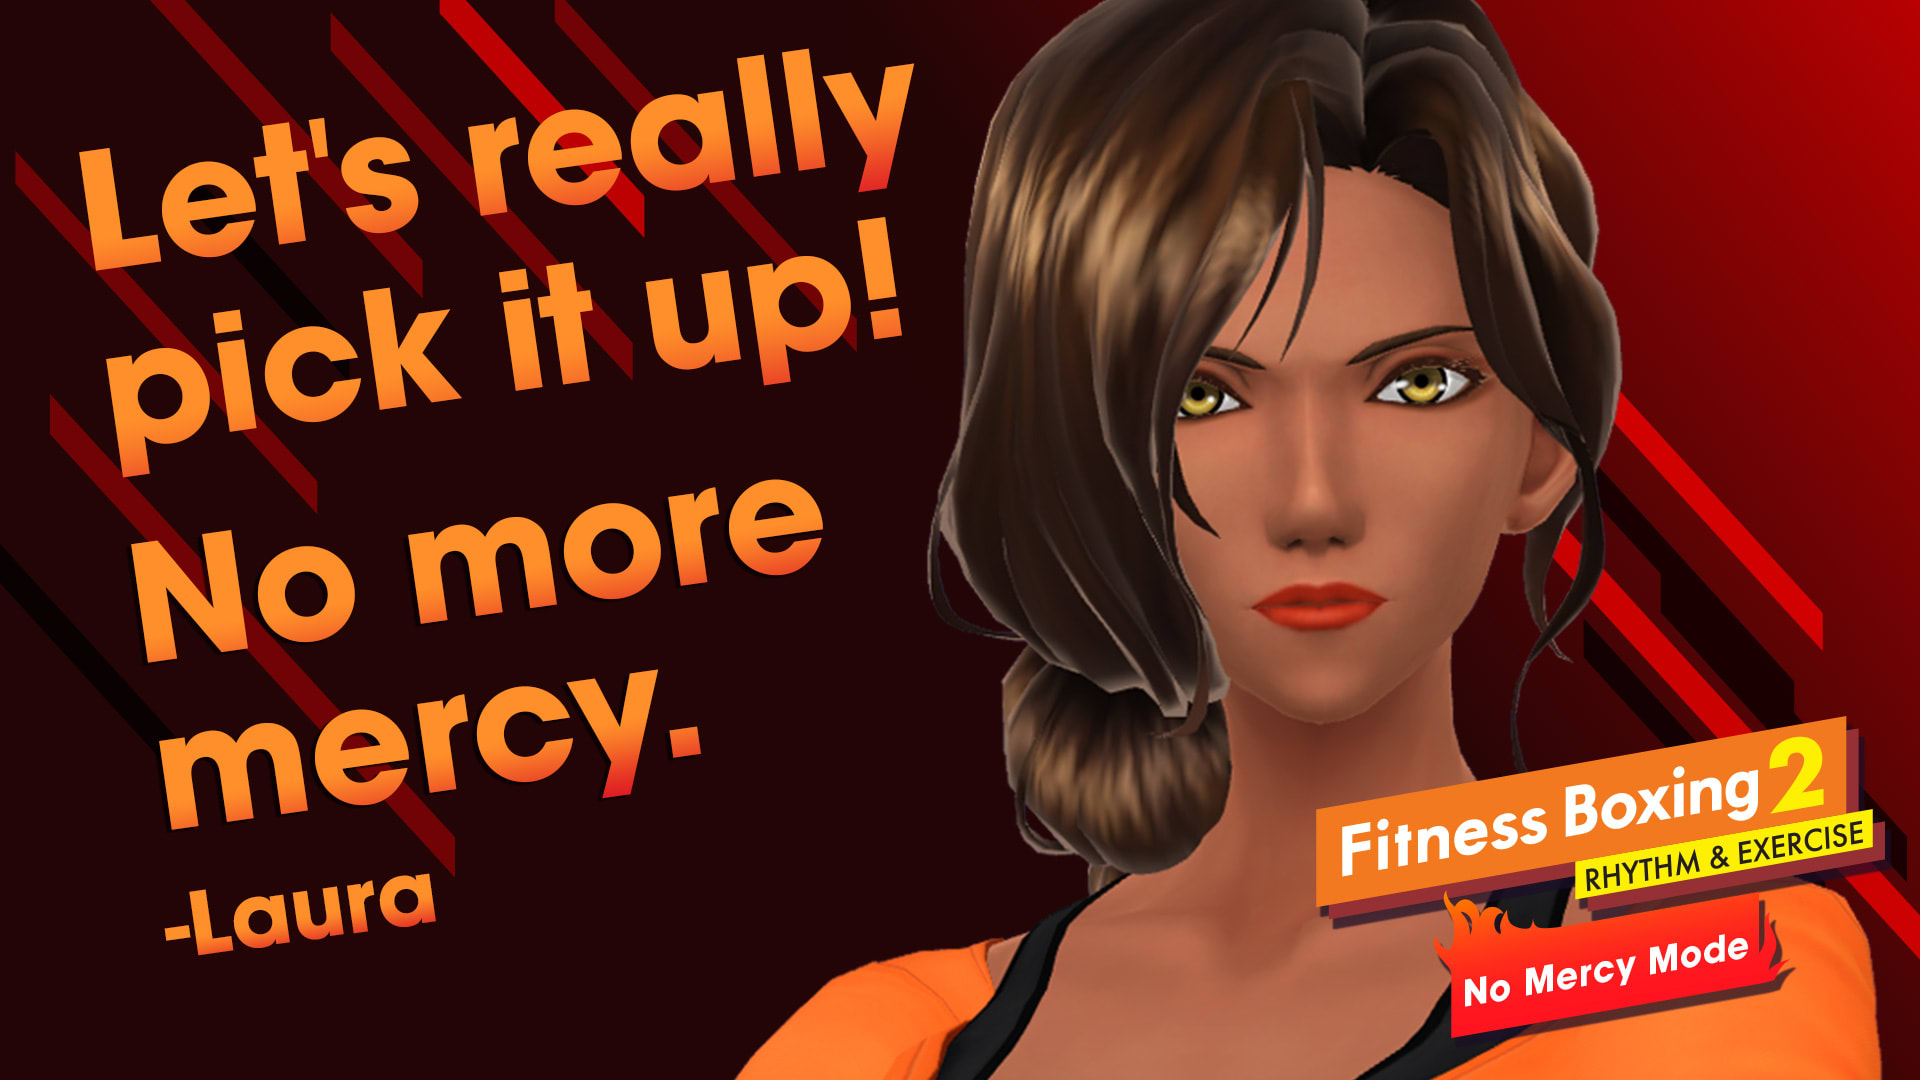 Fitness Boxing 2: Rhythm & Exercise No Mercy intensity: Laura